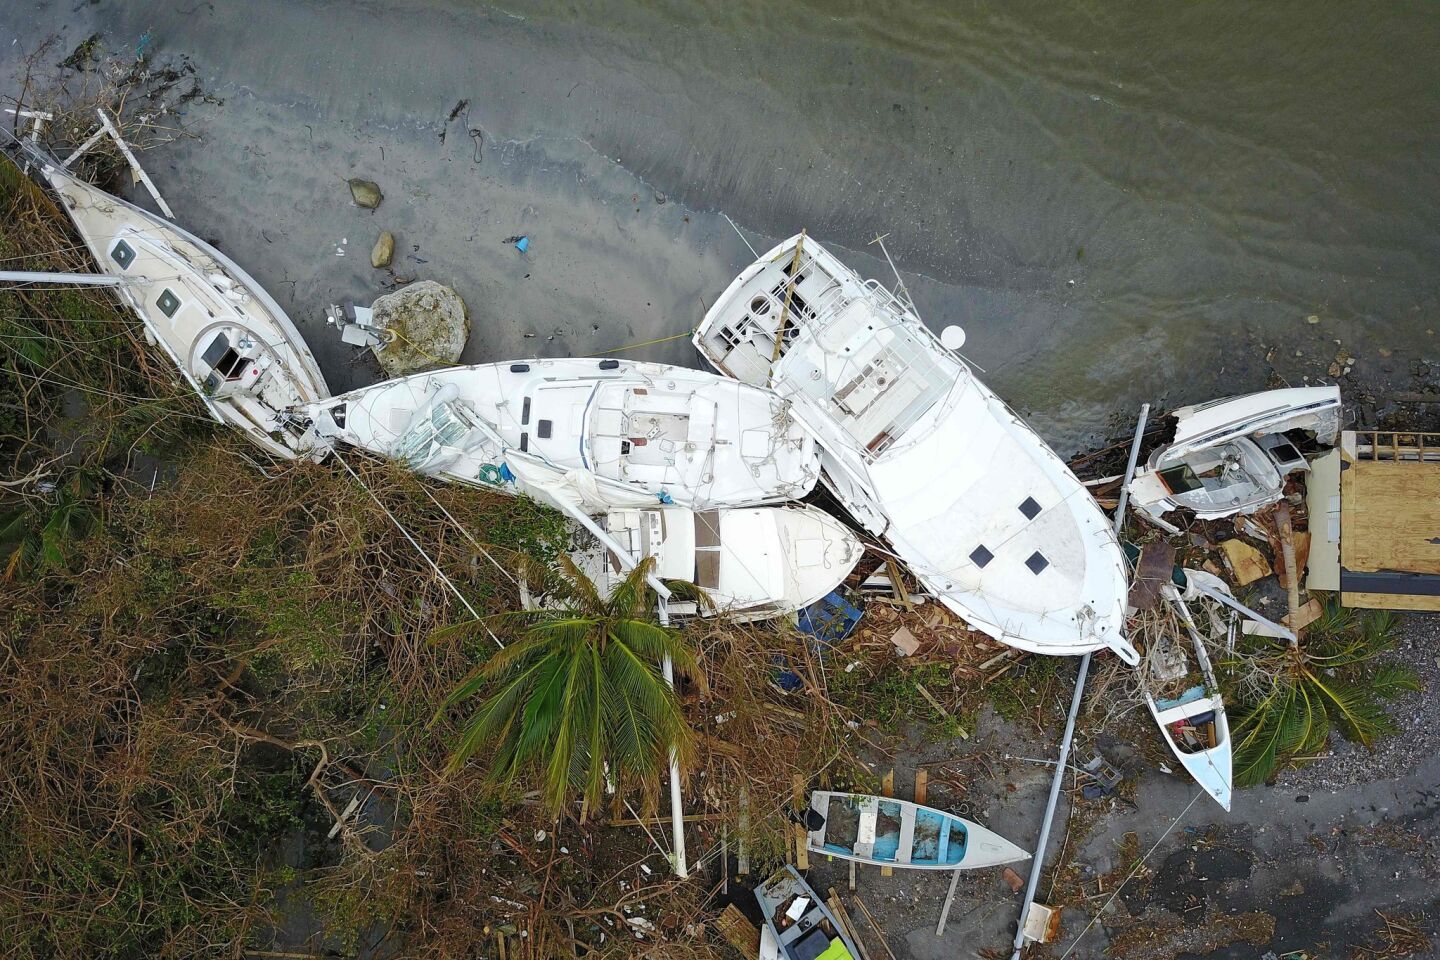 Damaged sailboats washed ashore are seen in the aftermath of Hurricane Maria in Fajardo, Puerto Rico.